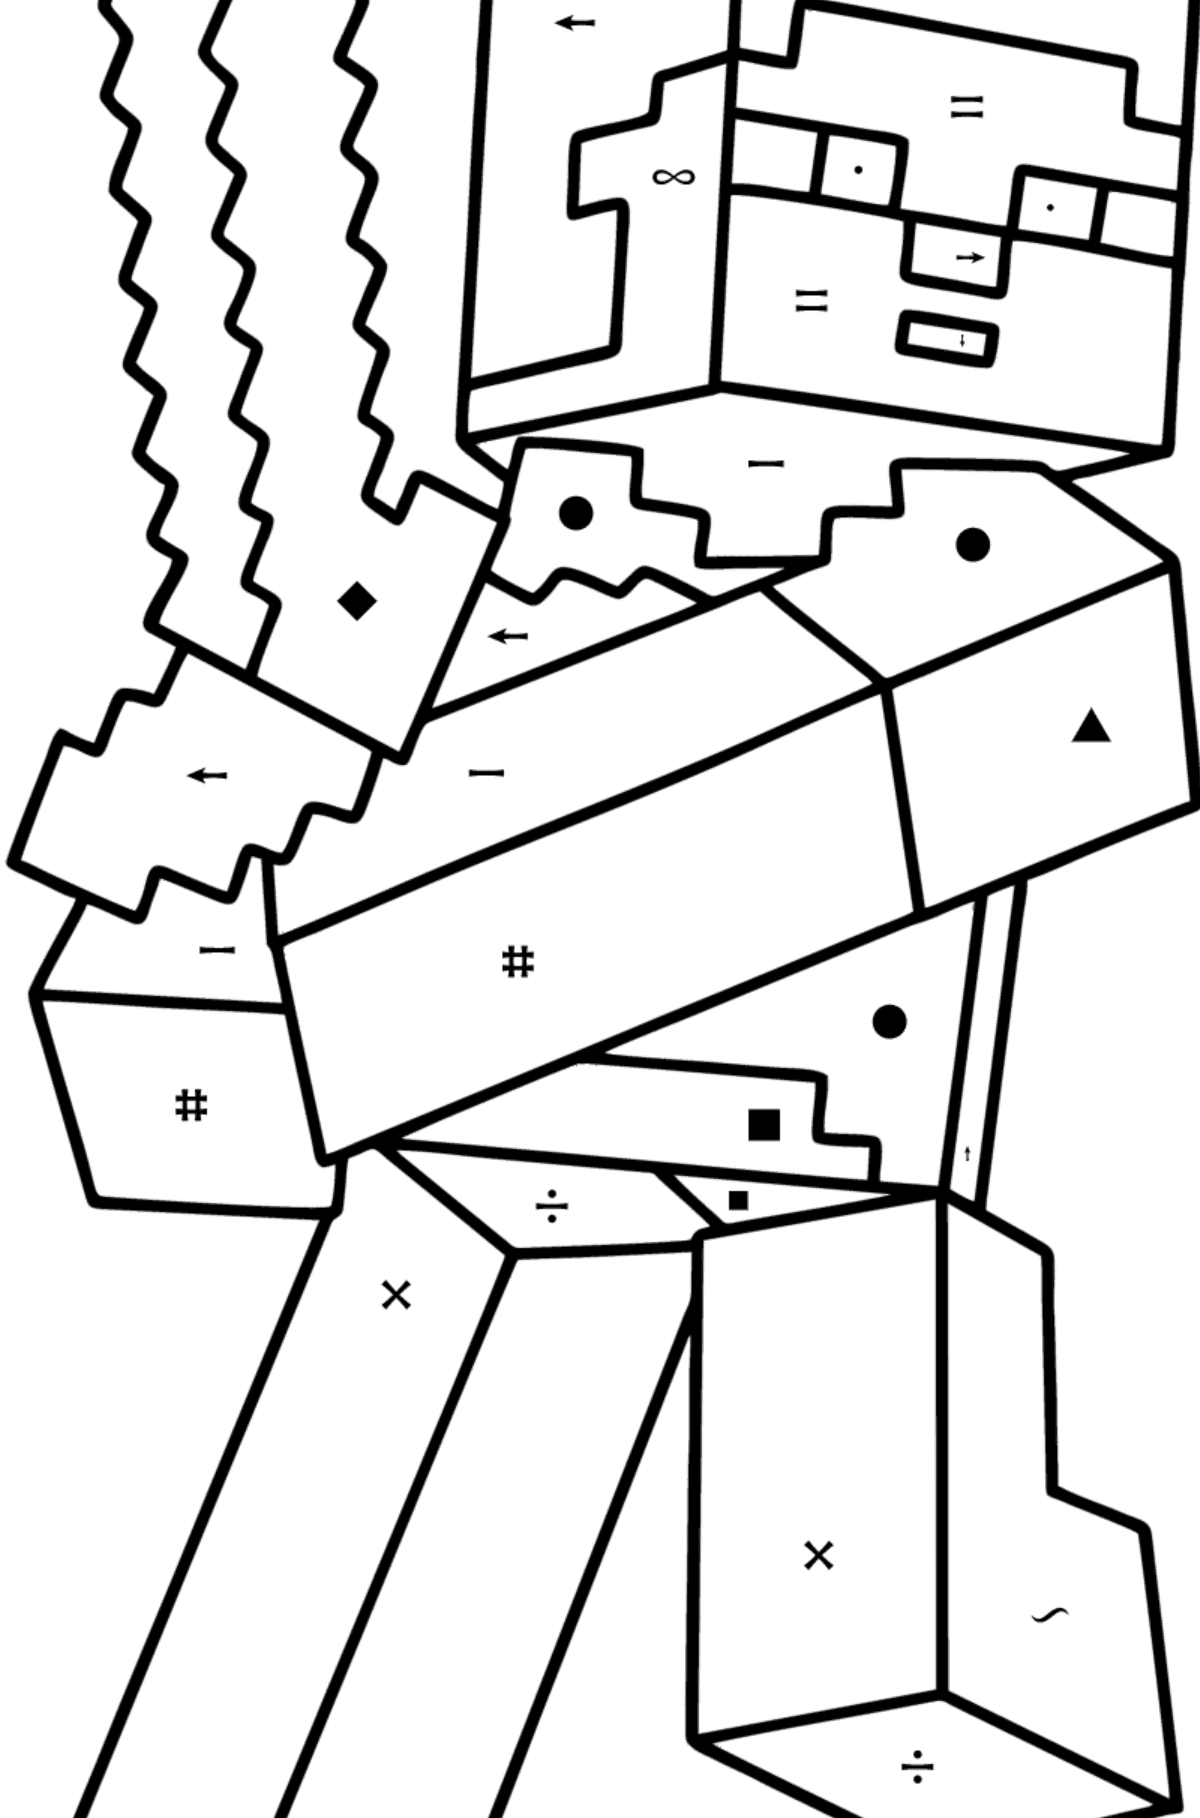 Minecraft Steve coloring page - Coloring by Symbols for Kids